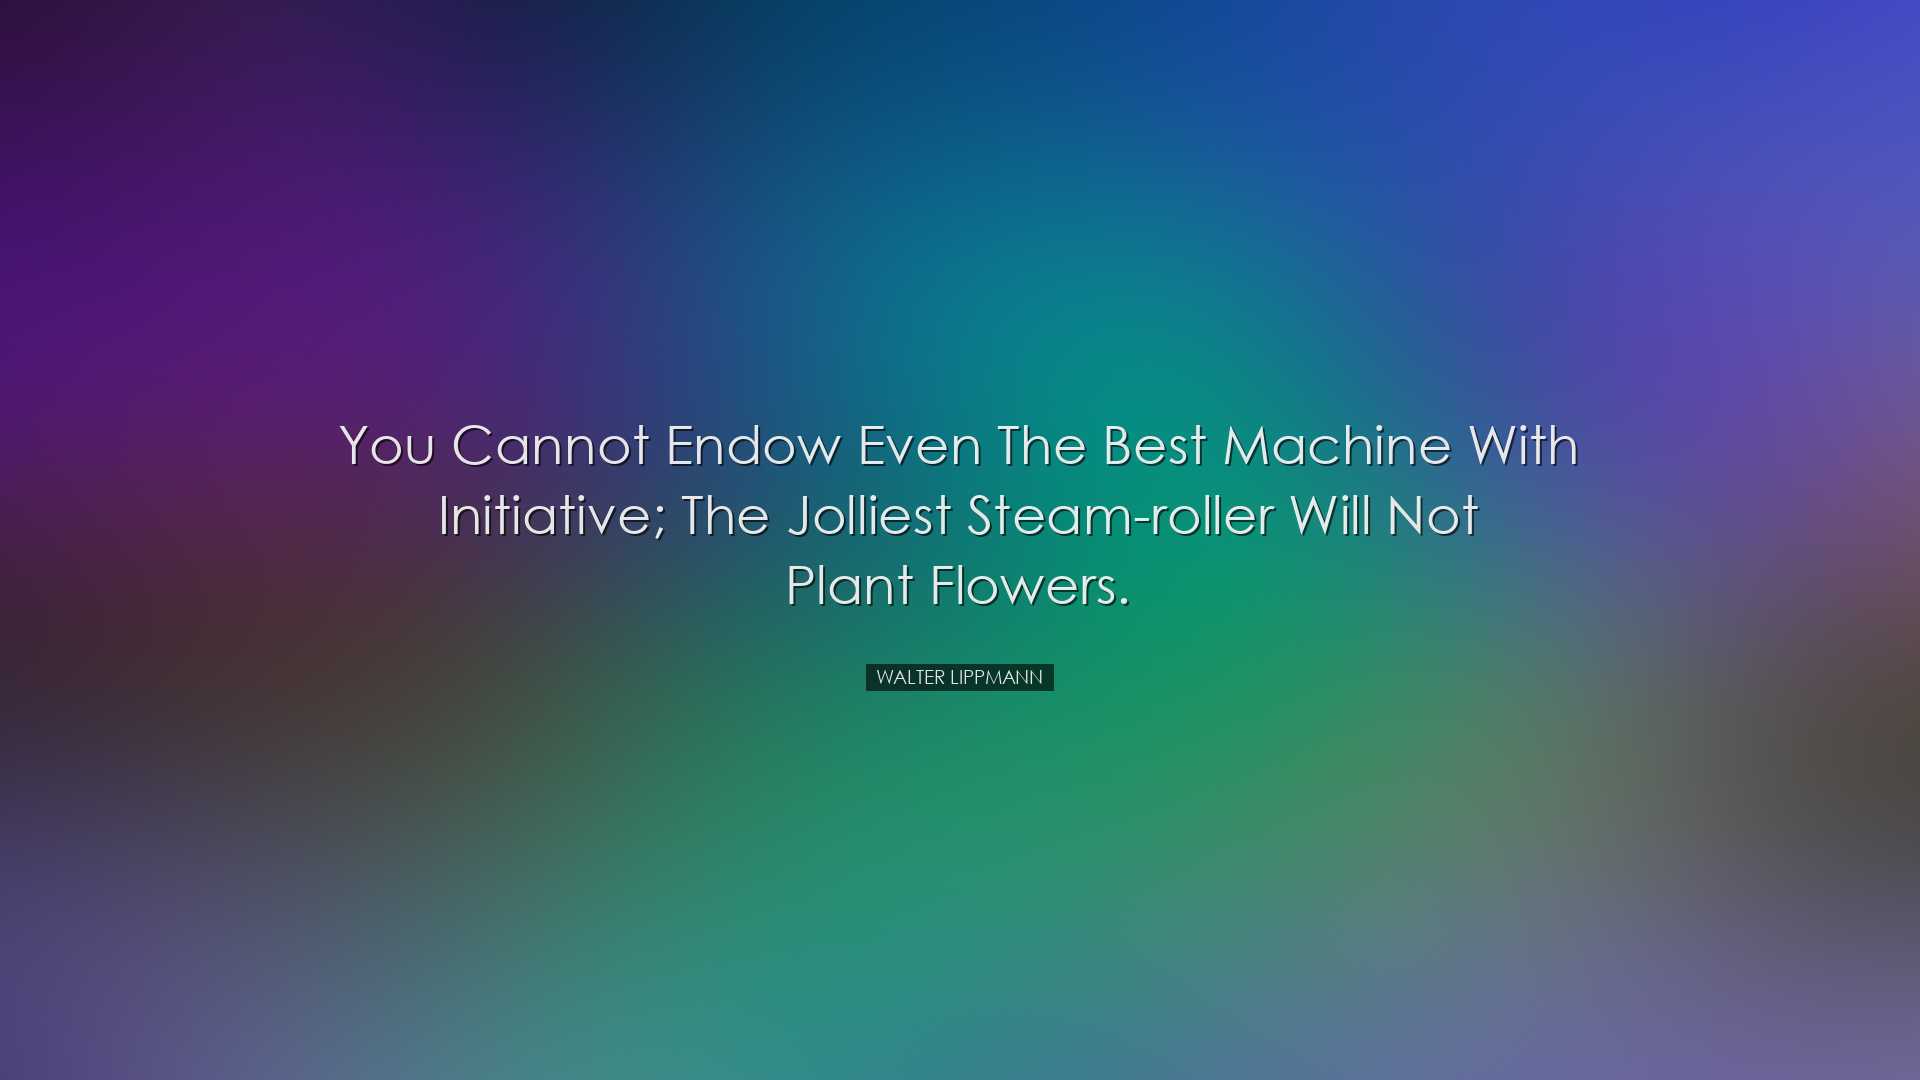 You cannot endow even the best machine with initiative; the jollie